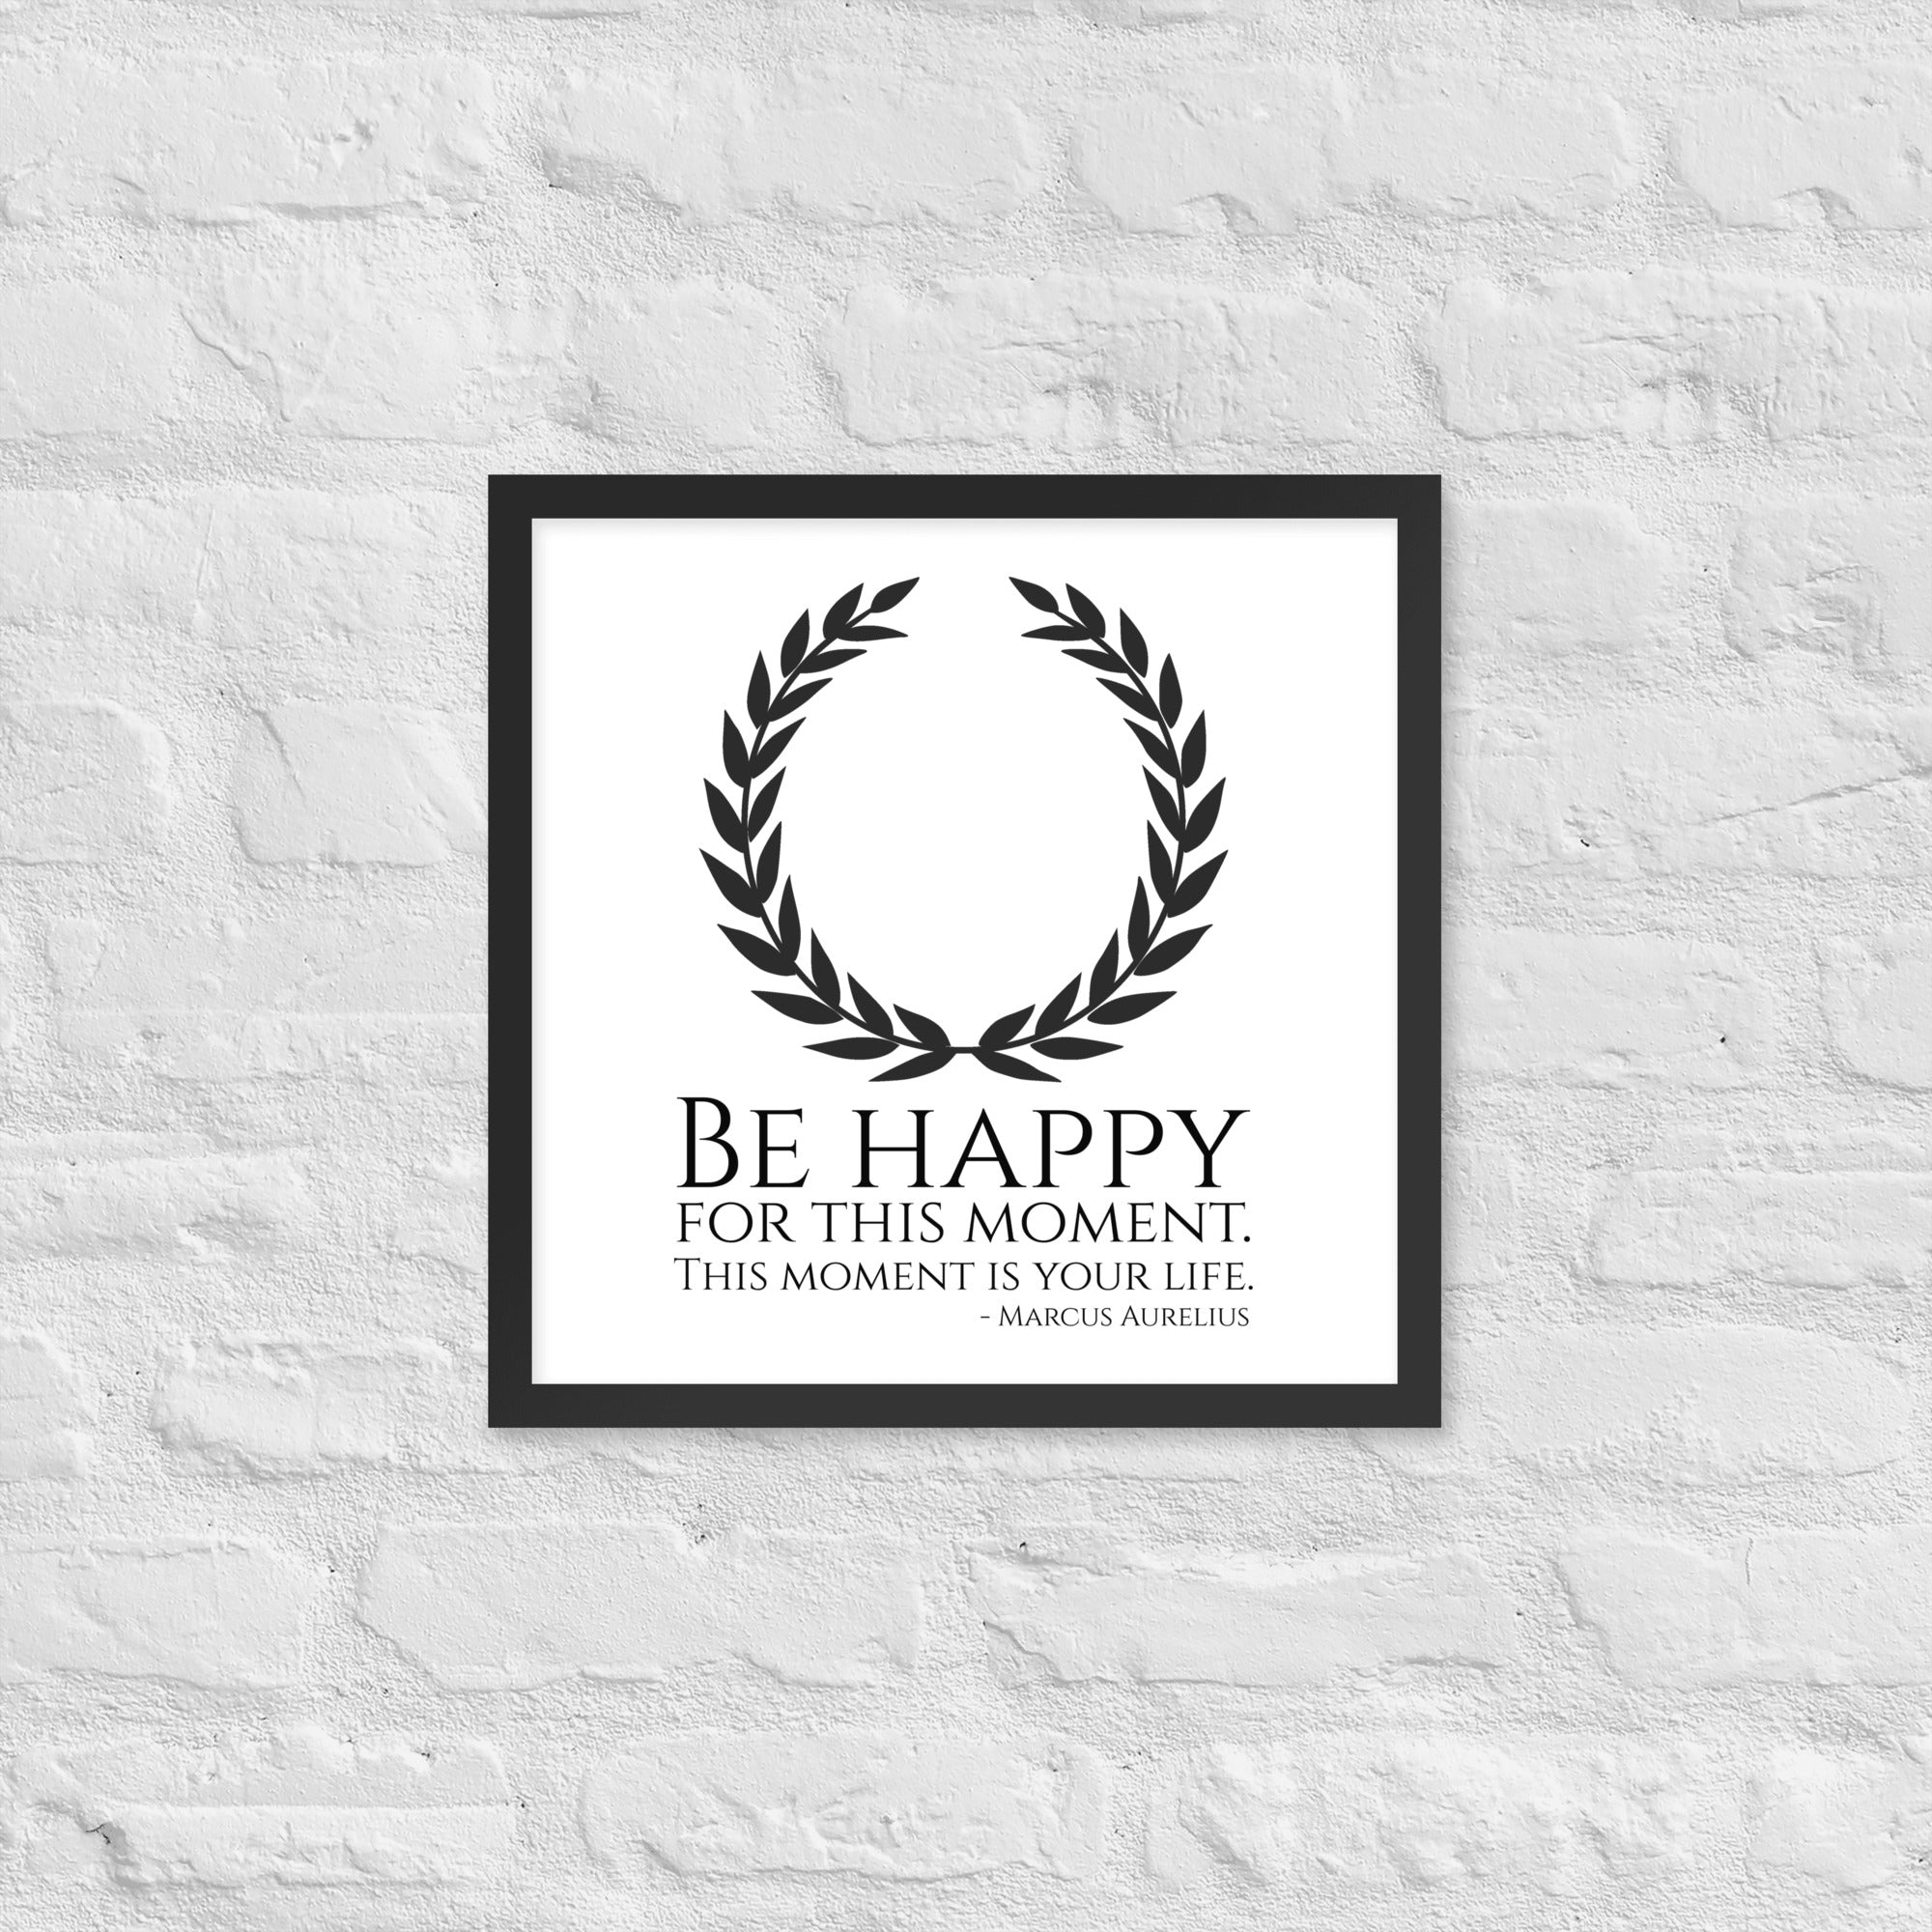 Be Happy For This Moment. This Moment Is Your Life - Marcus Aurelius Quote - Stoic Philosophy - Framed poster